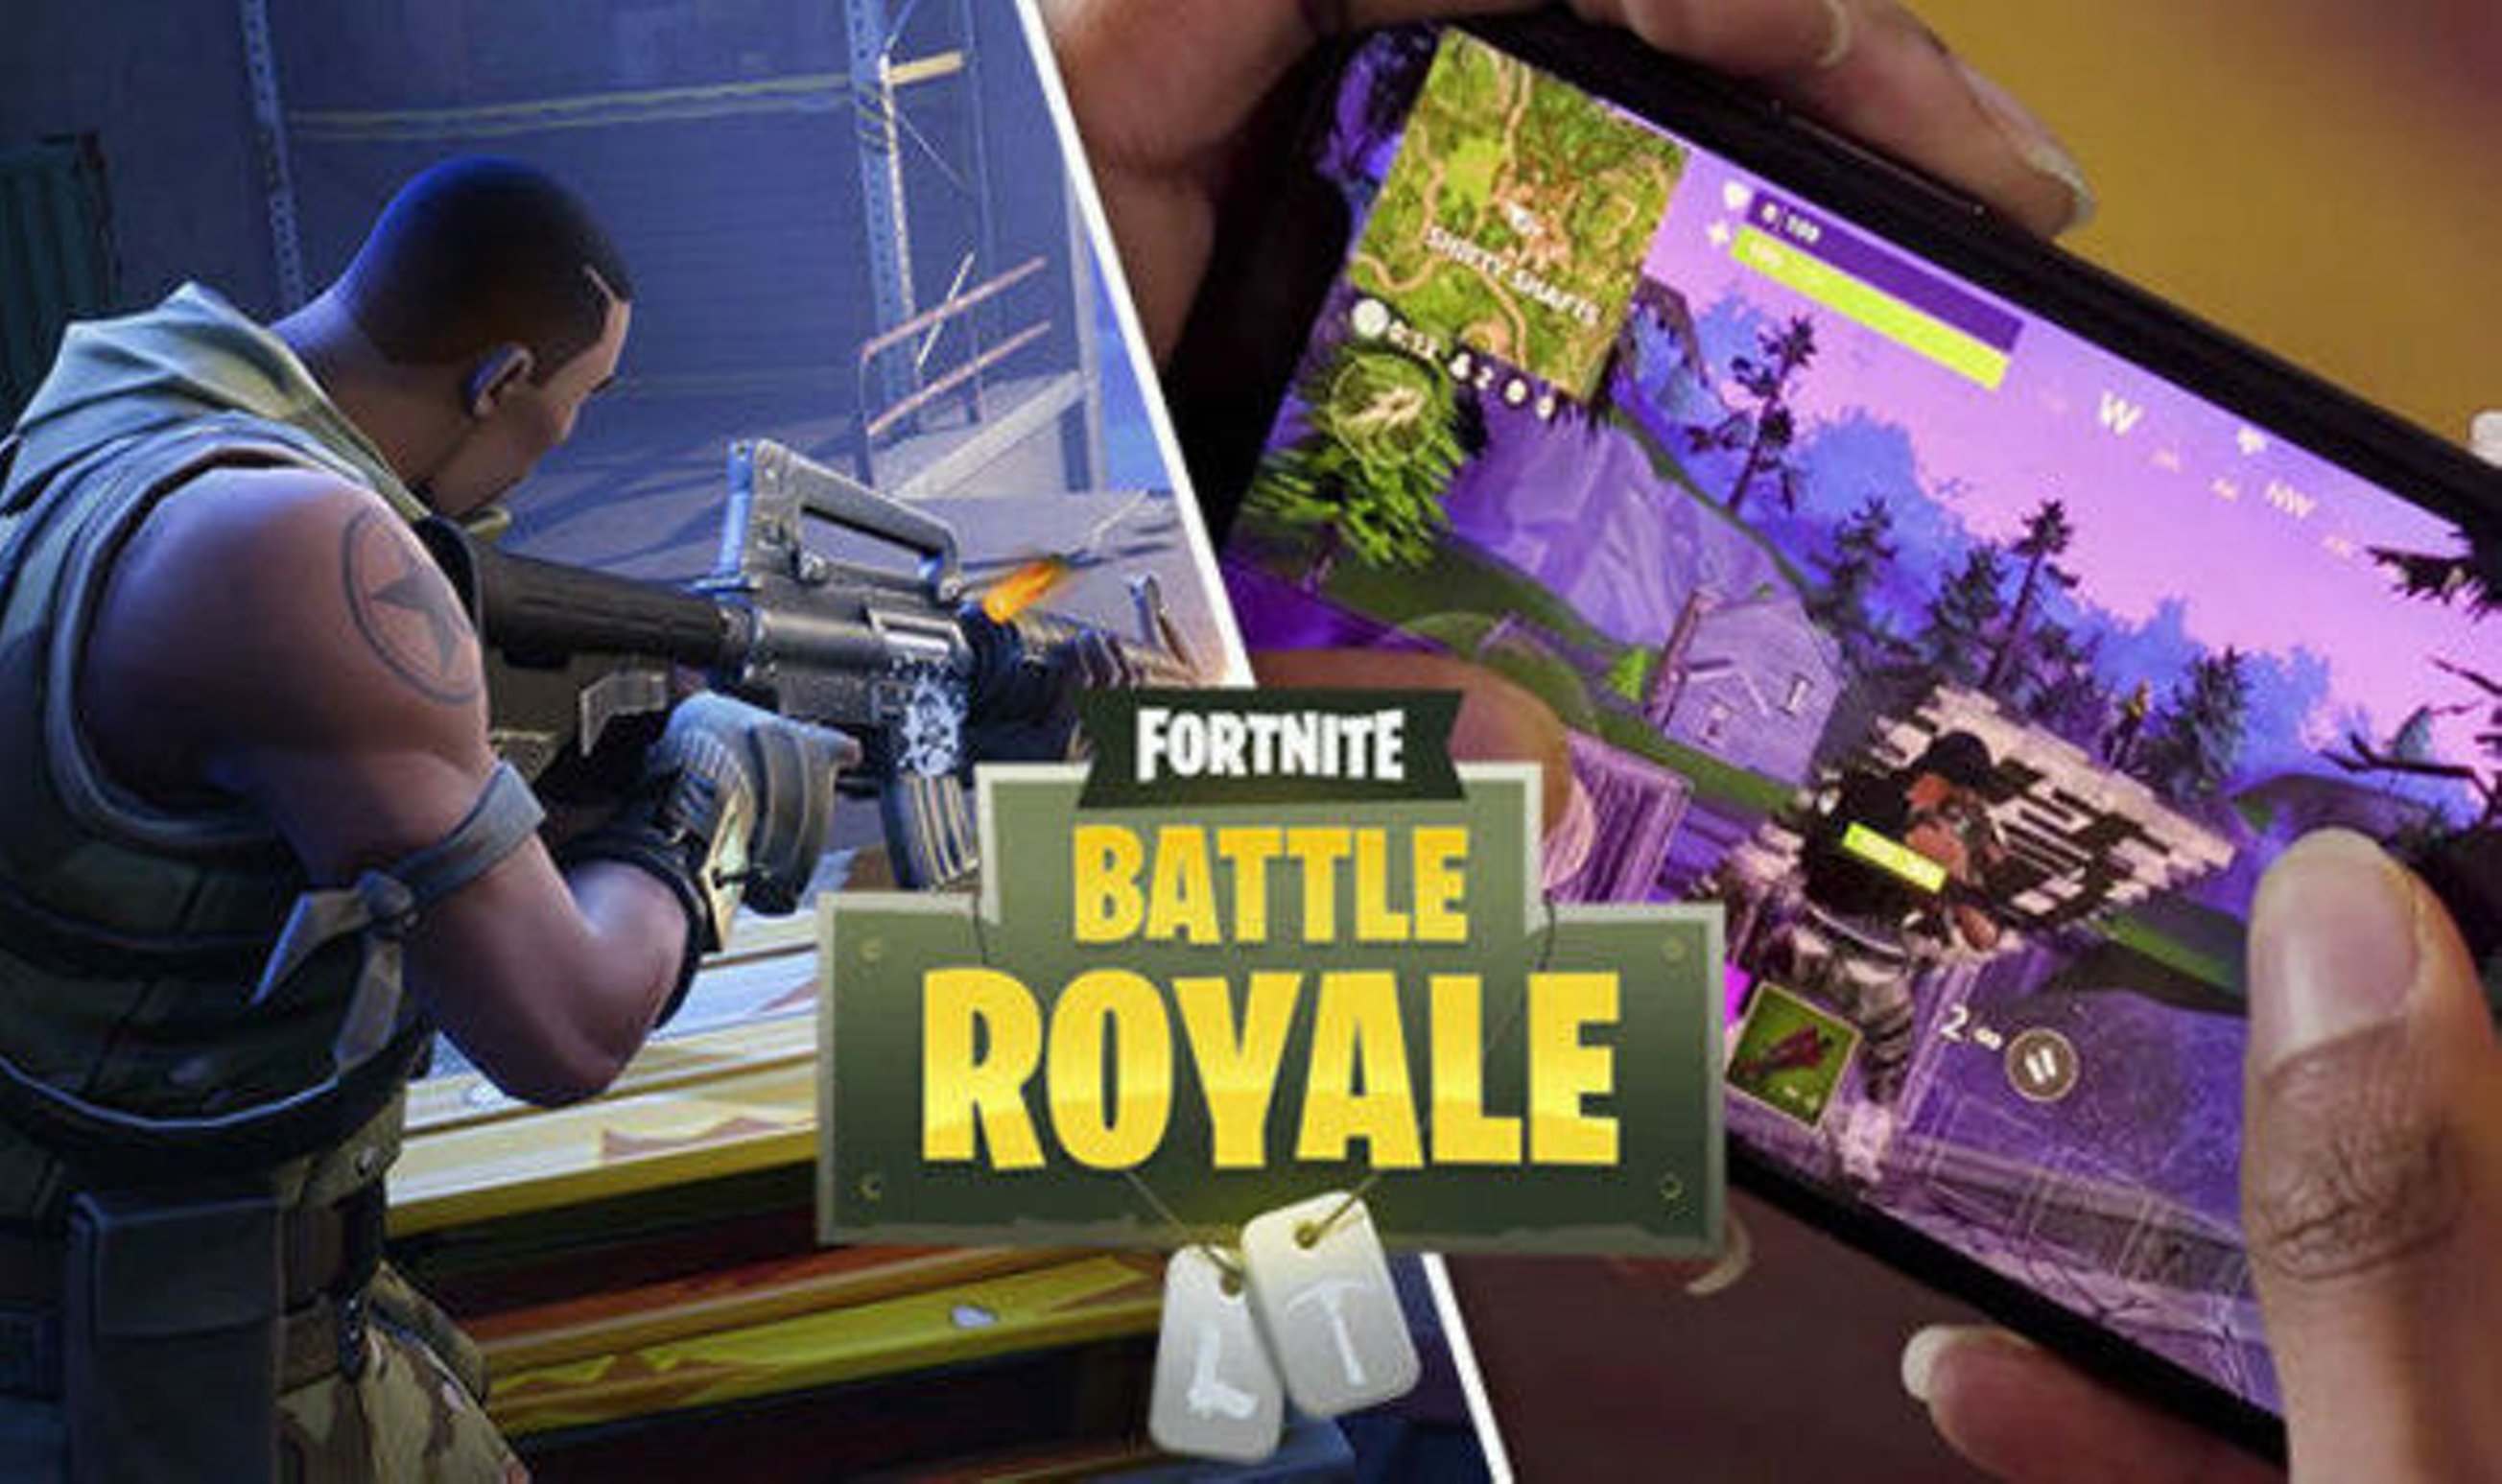 Compatible devices with Fortnite battle royale